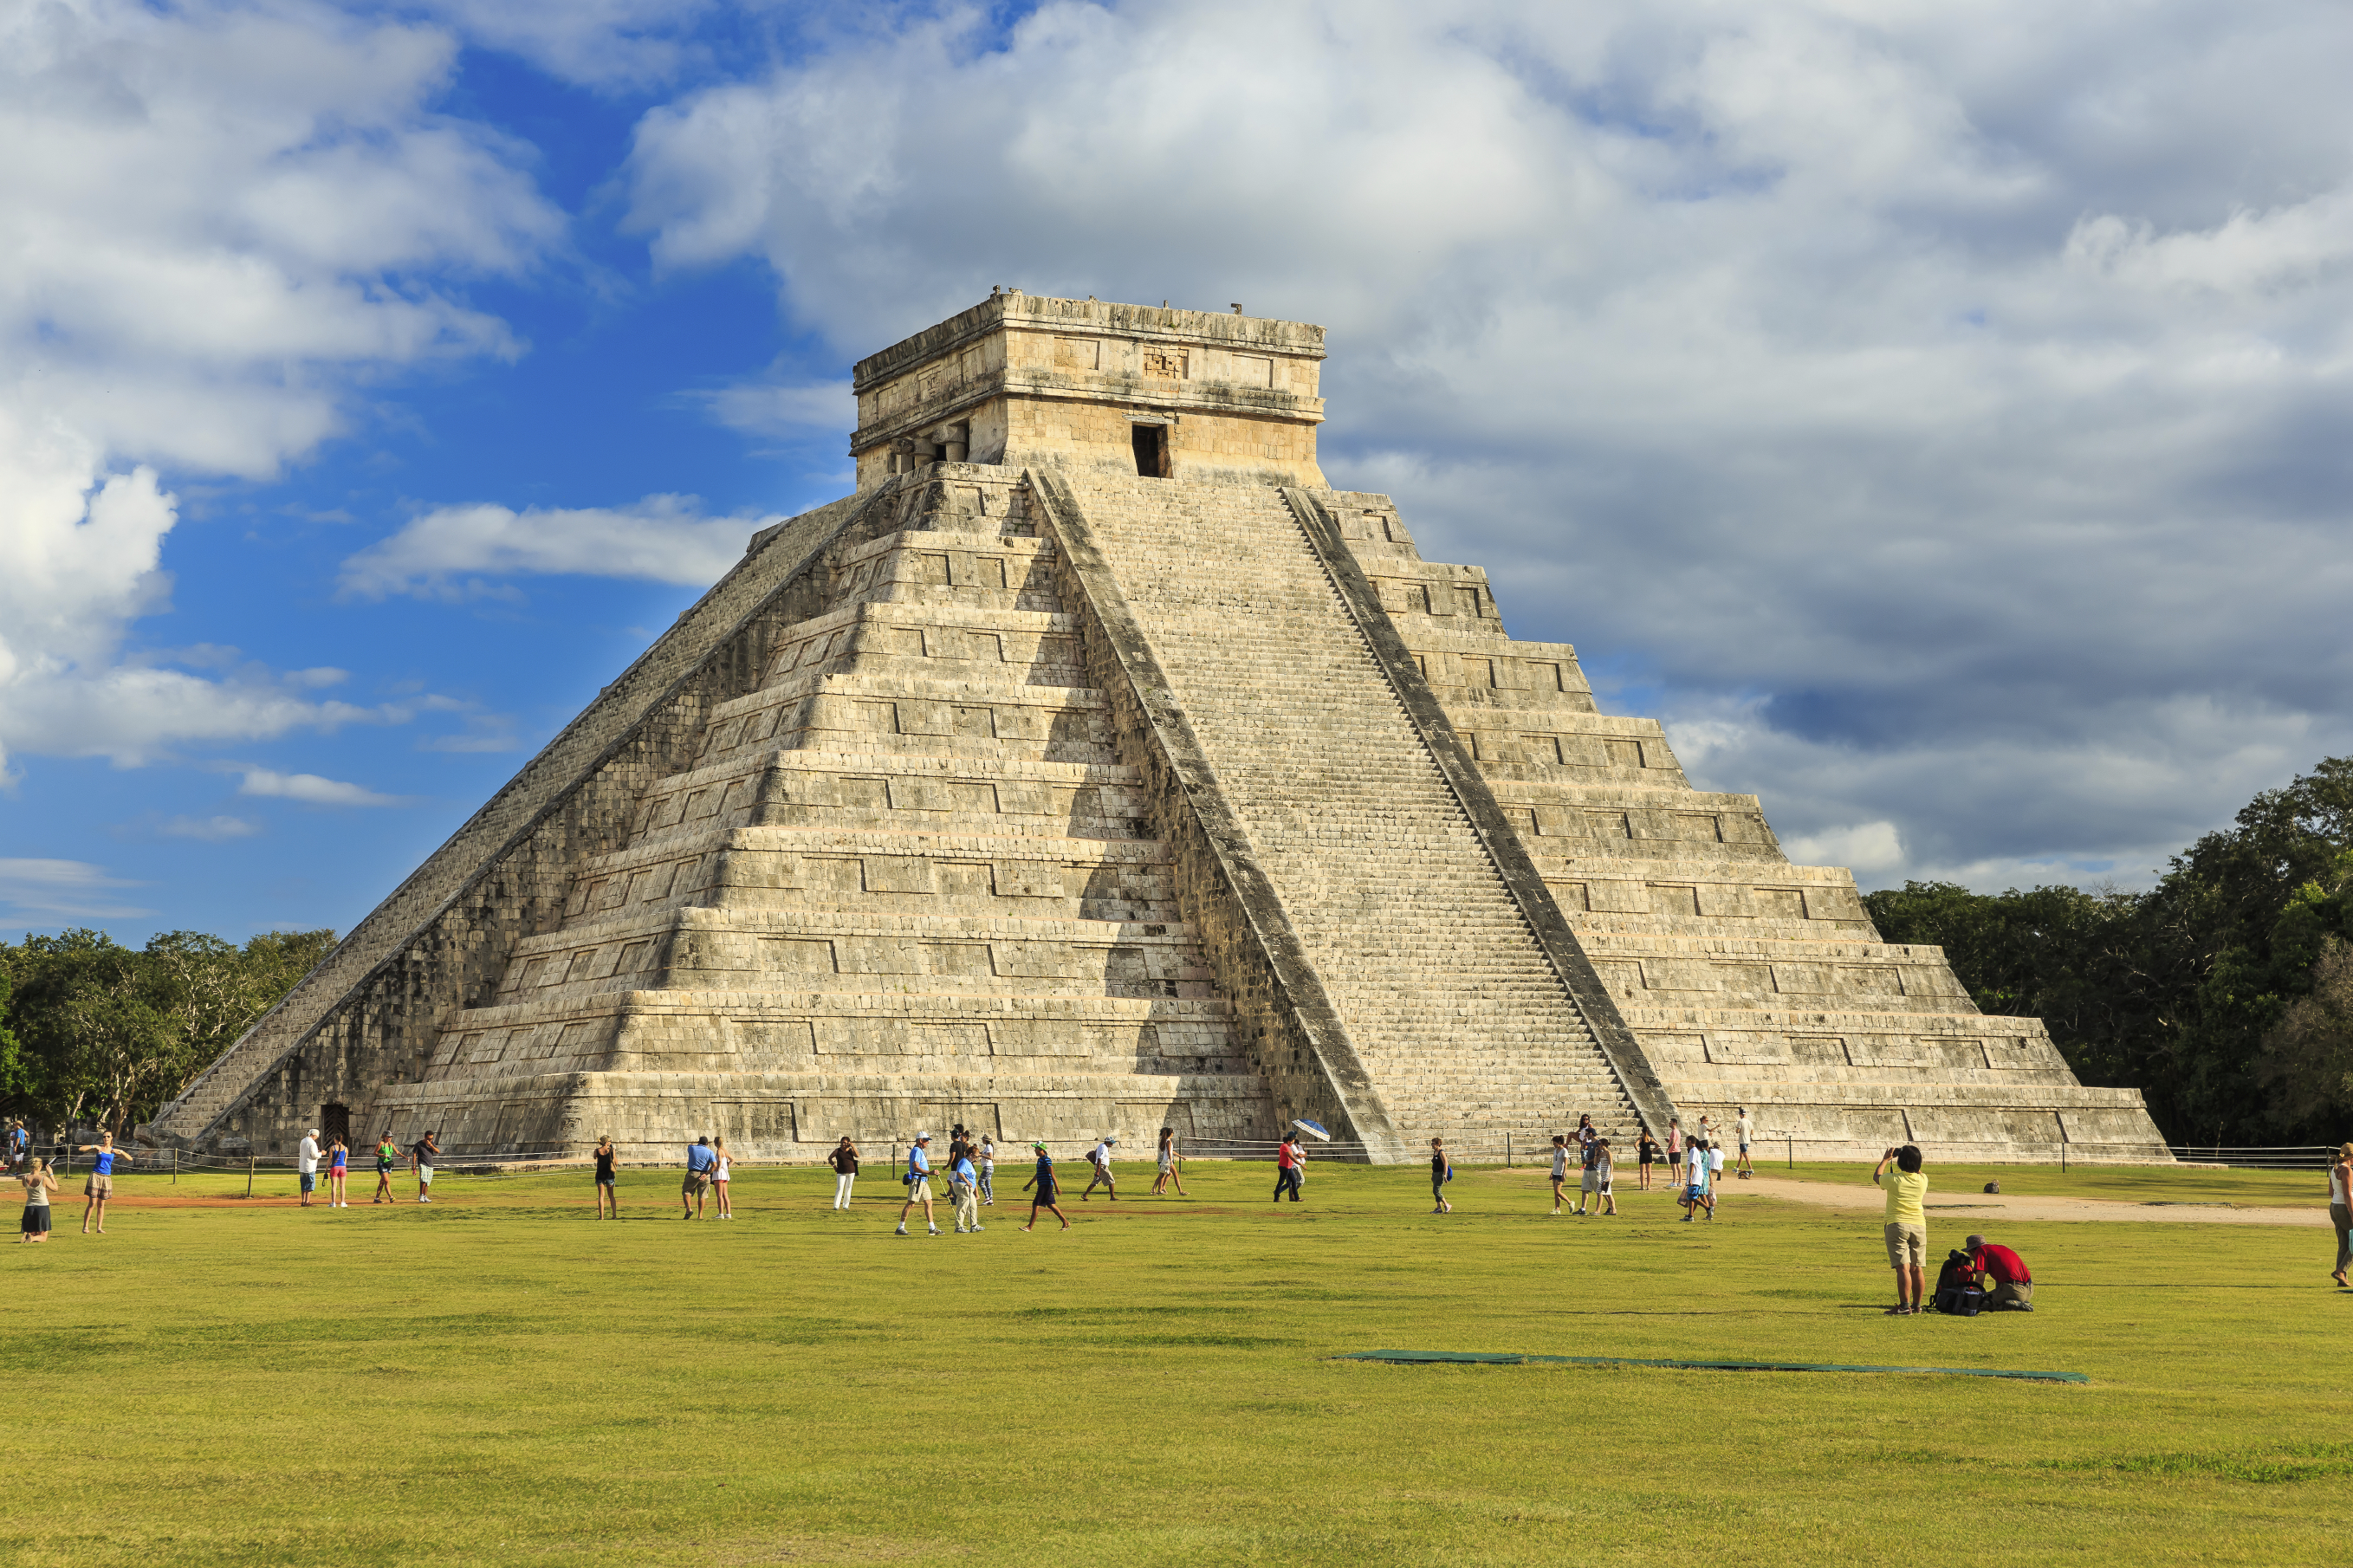 20. Chichén Itzá - The world's most popular tourist attractions